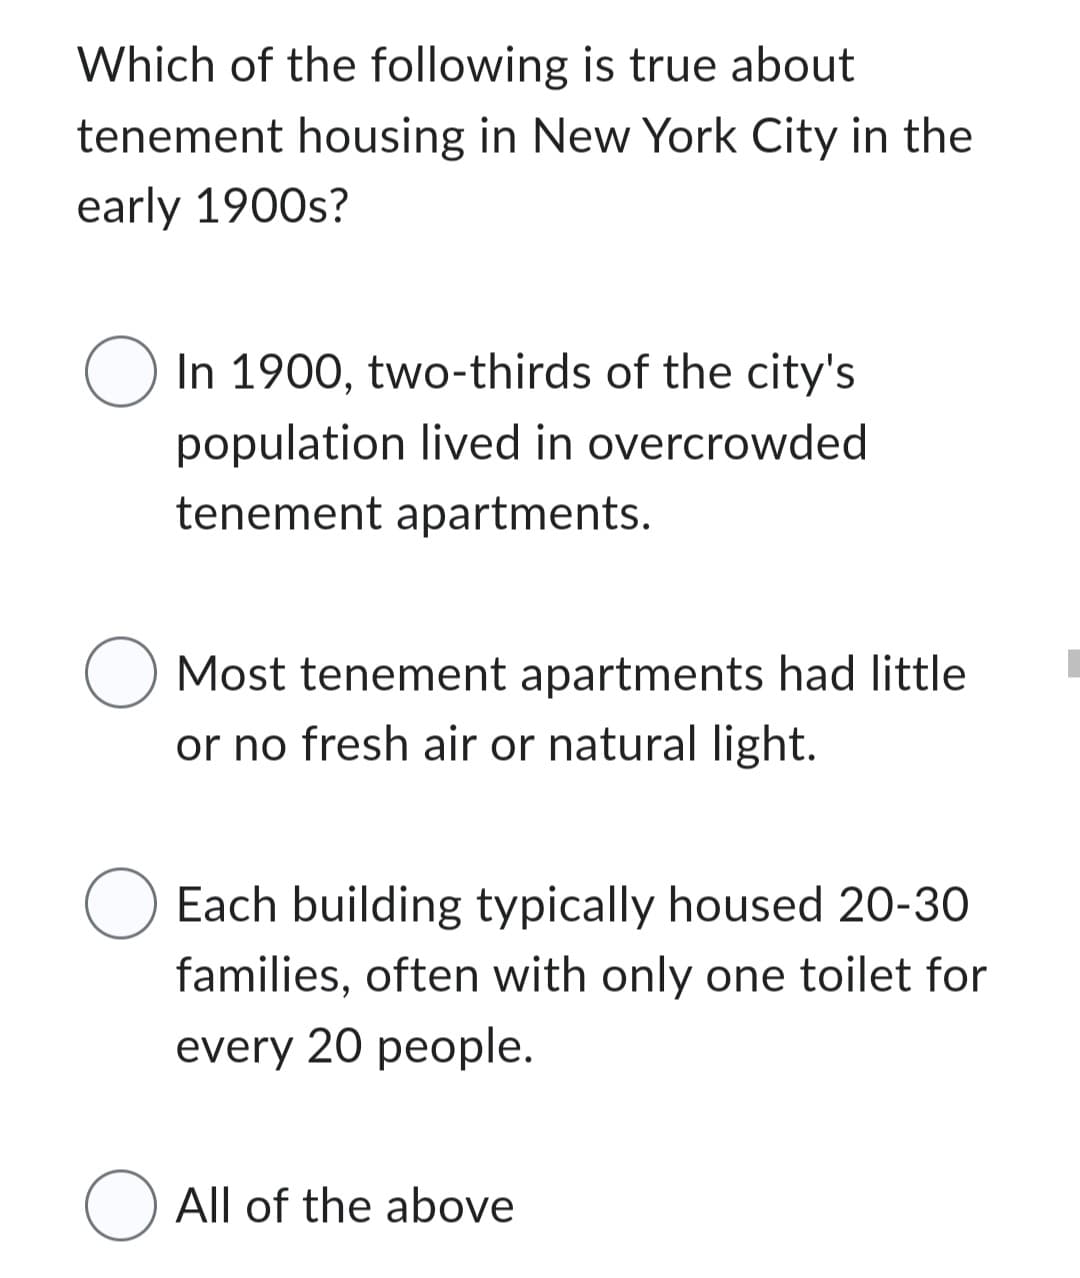 Which of the following is true about
tenement housing in New York City in the
early 1900s?
○ In 1900, two-thirds of the city's
population lived in overcrowded
tenement apartments.
O Most tenement apartments had little
or no fresh air or natural light.
O Each building typically housed 20-30
families, often with only one toilet for
every 20 people.
O All of the above